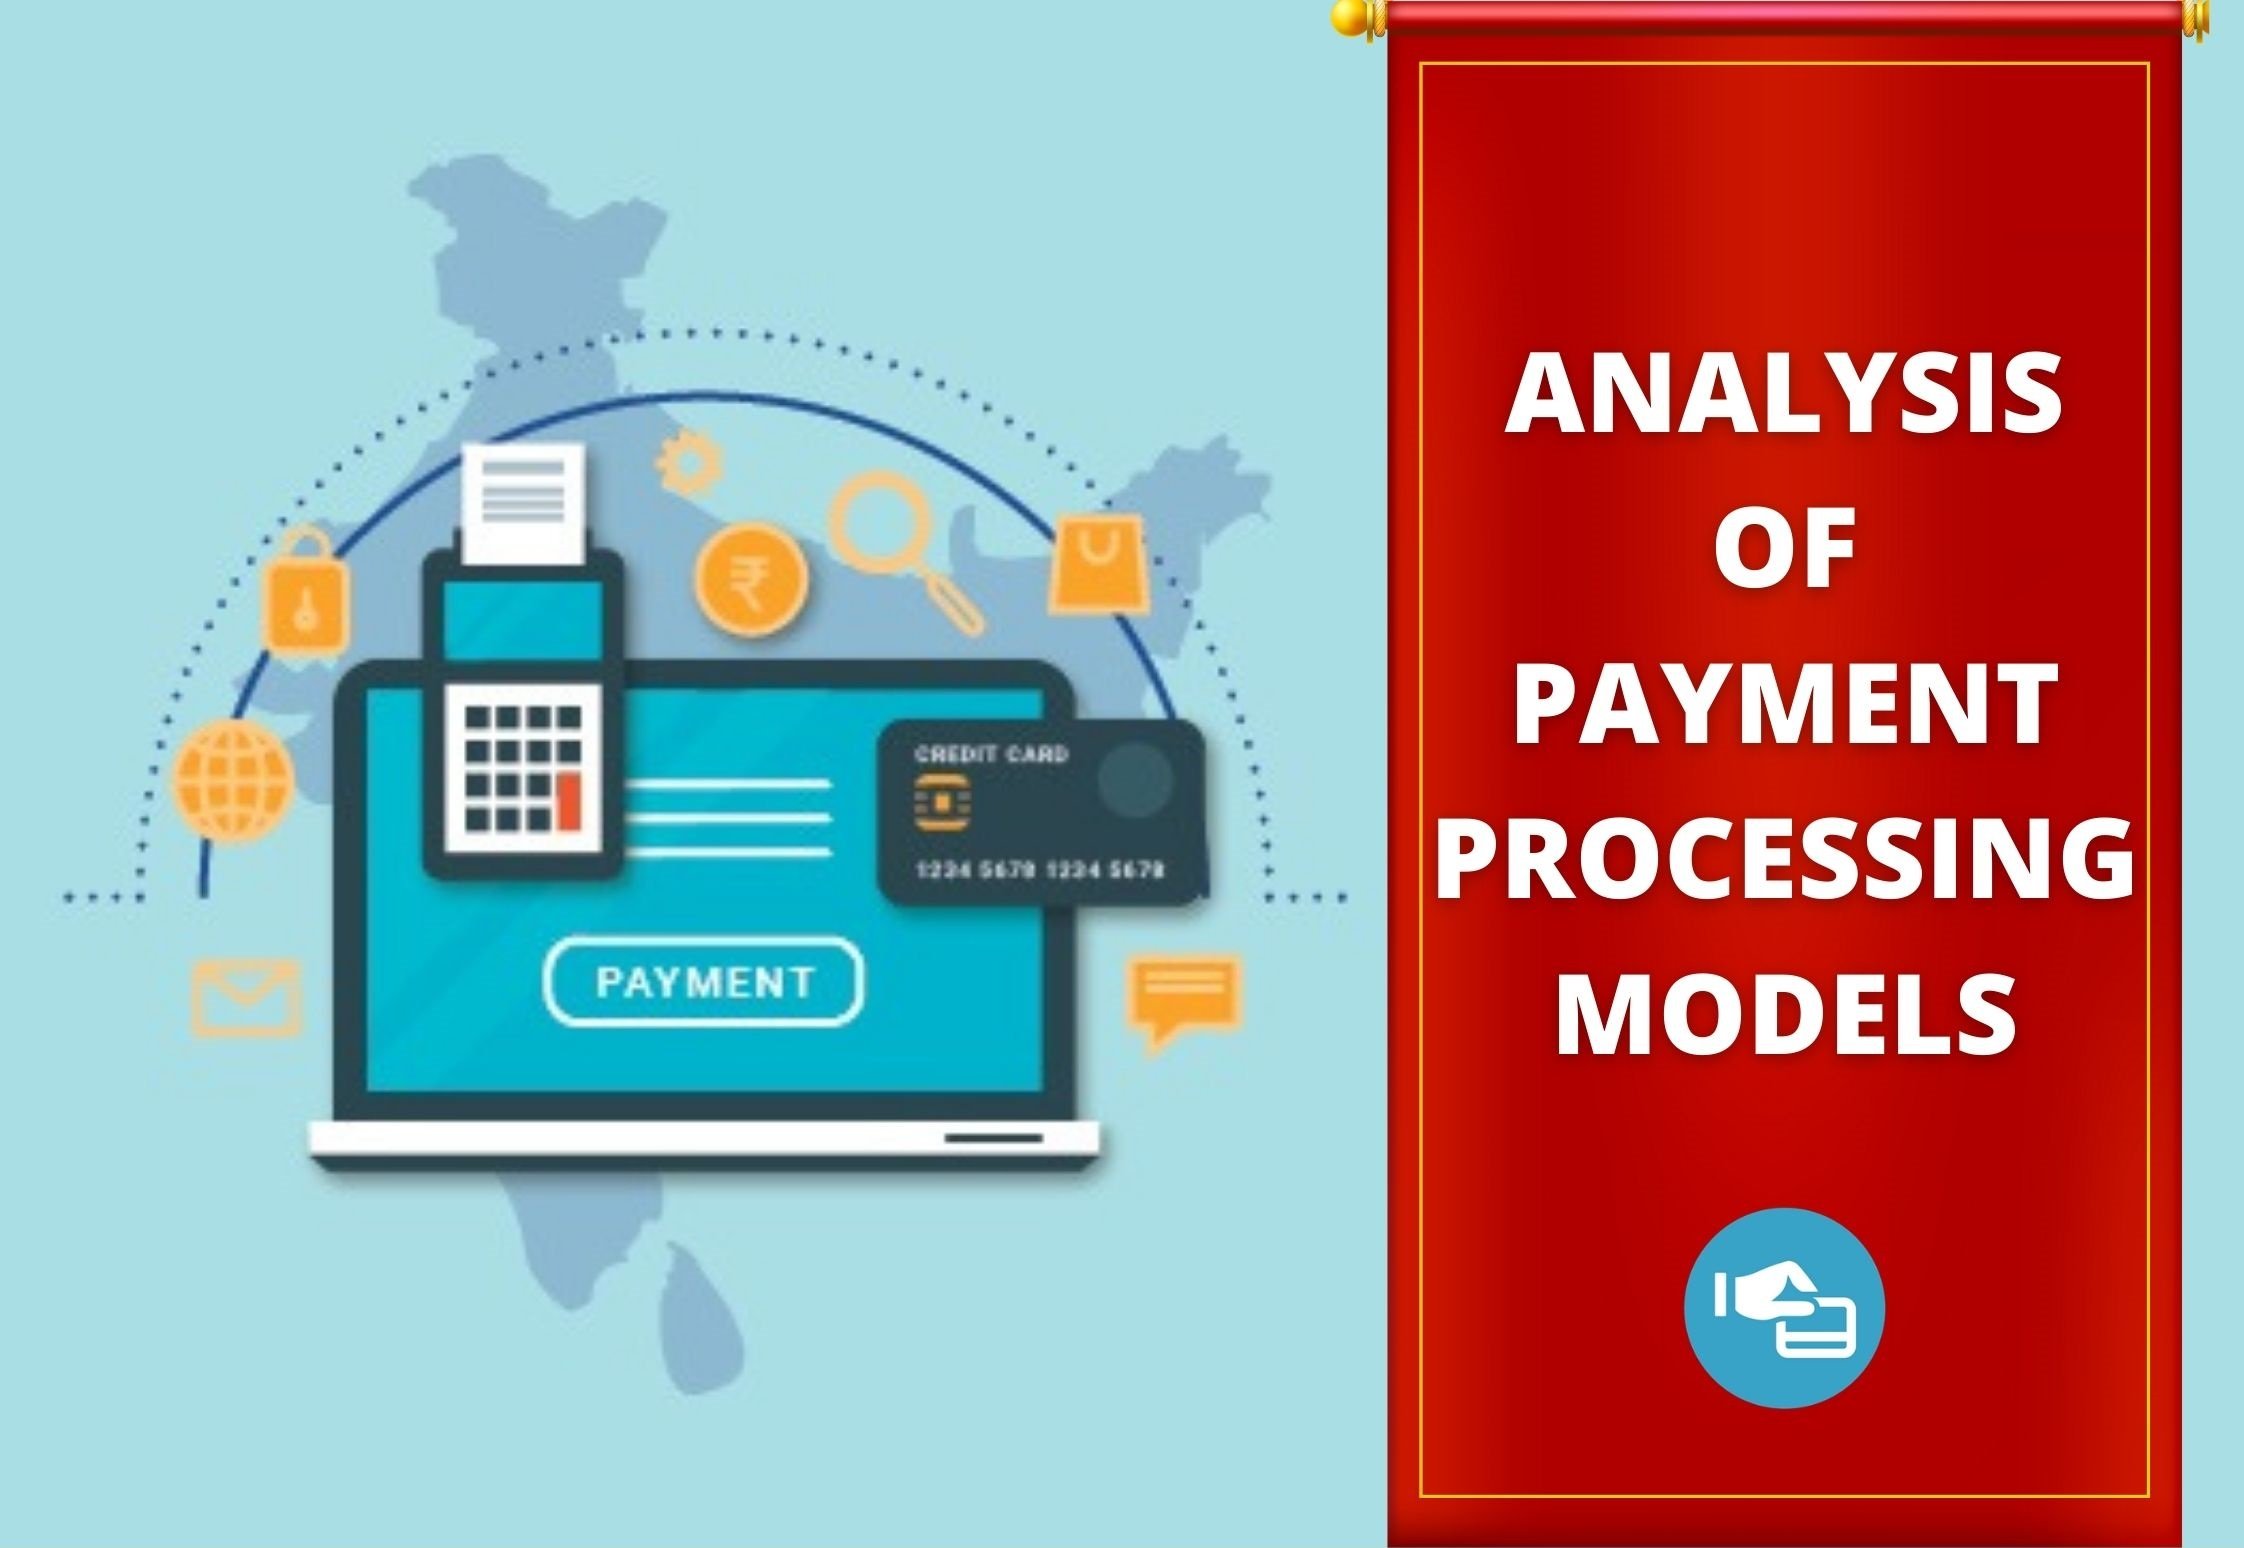 ANALYSIS OF PAYMENT PROCESSING MODELS